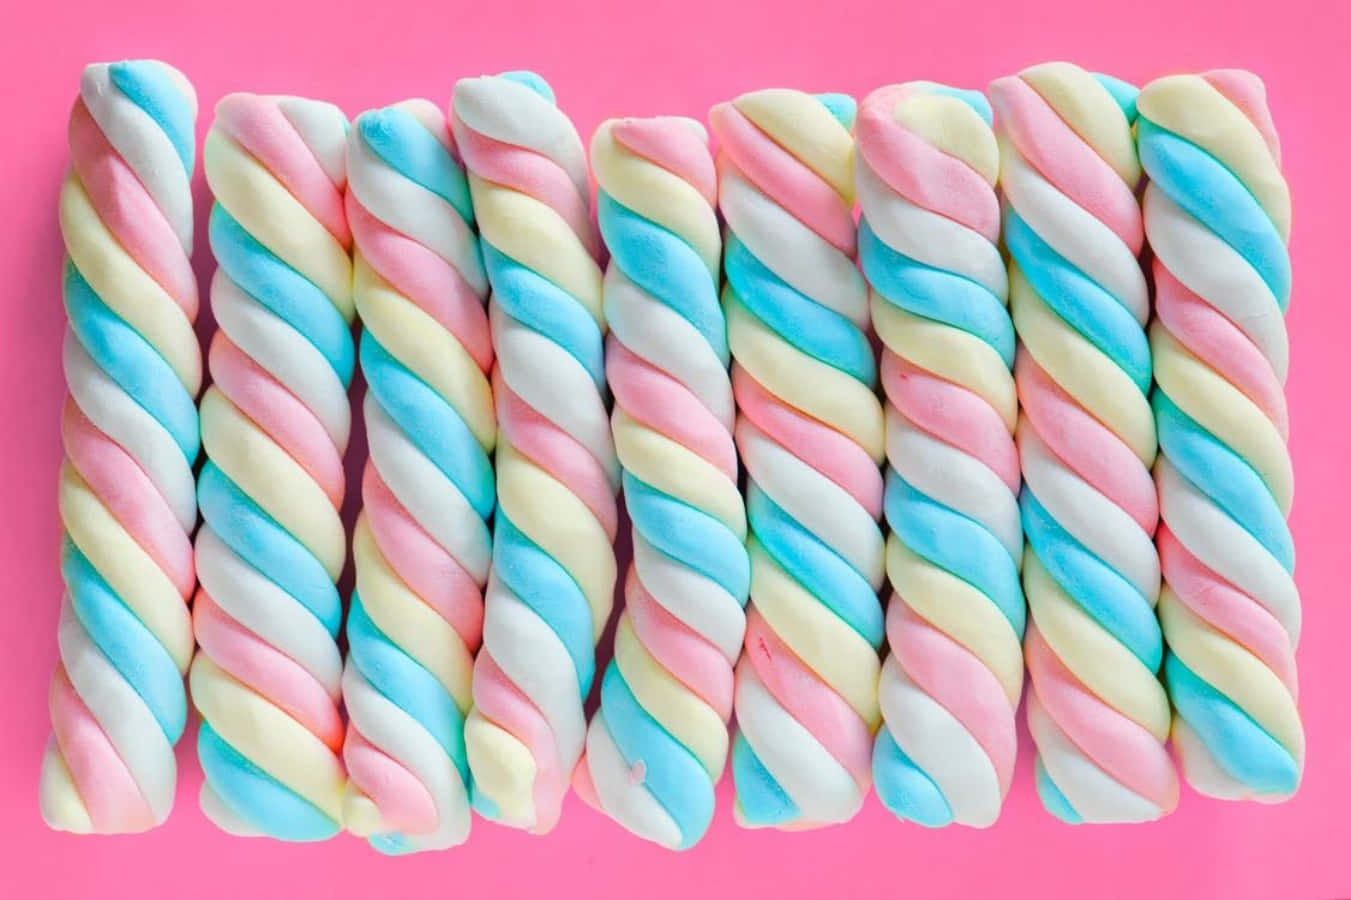 A Bunch Of Candy Floss On A Pink Background